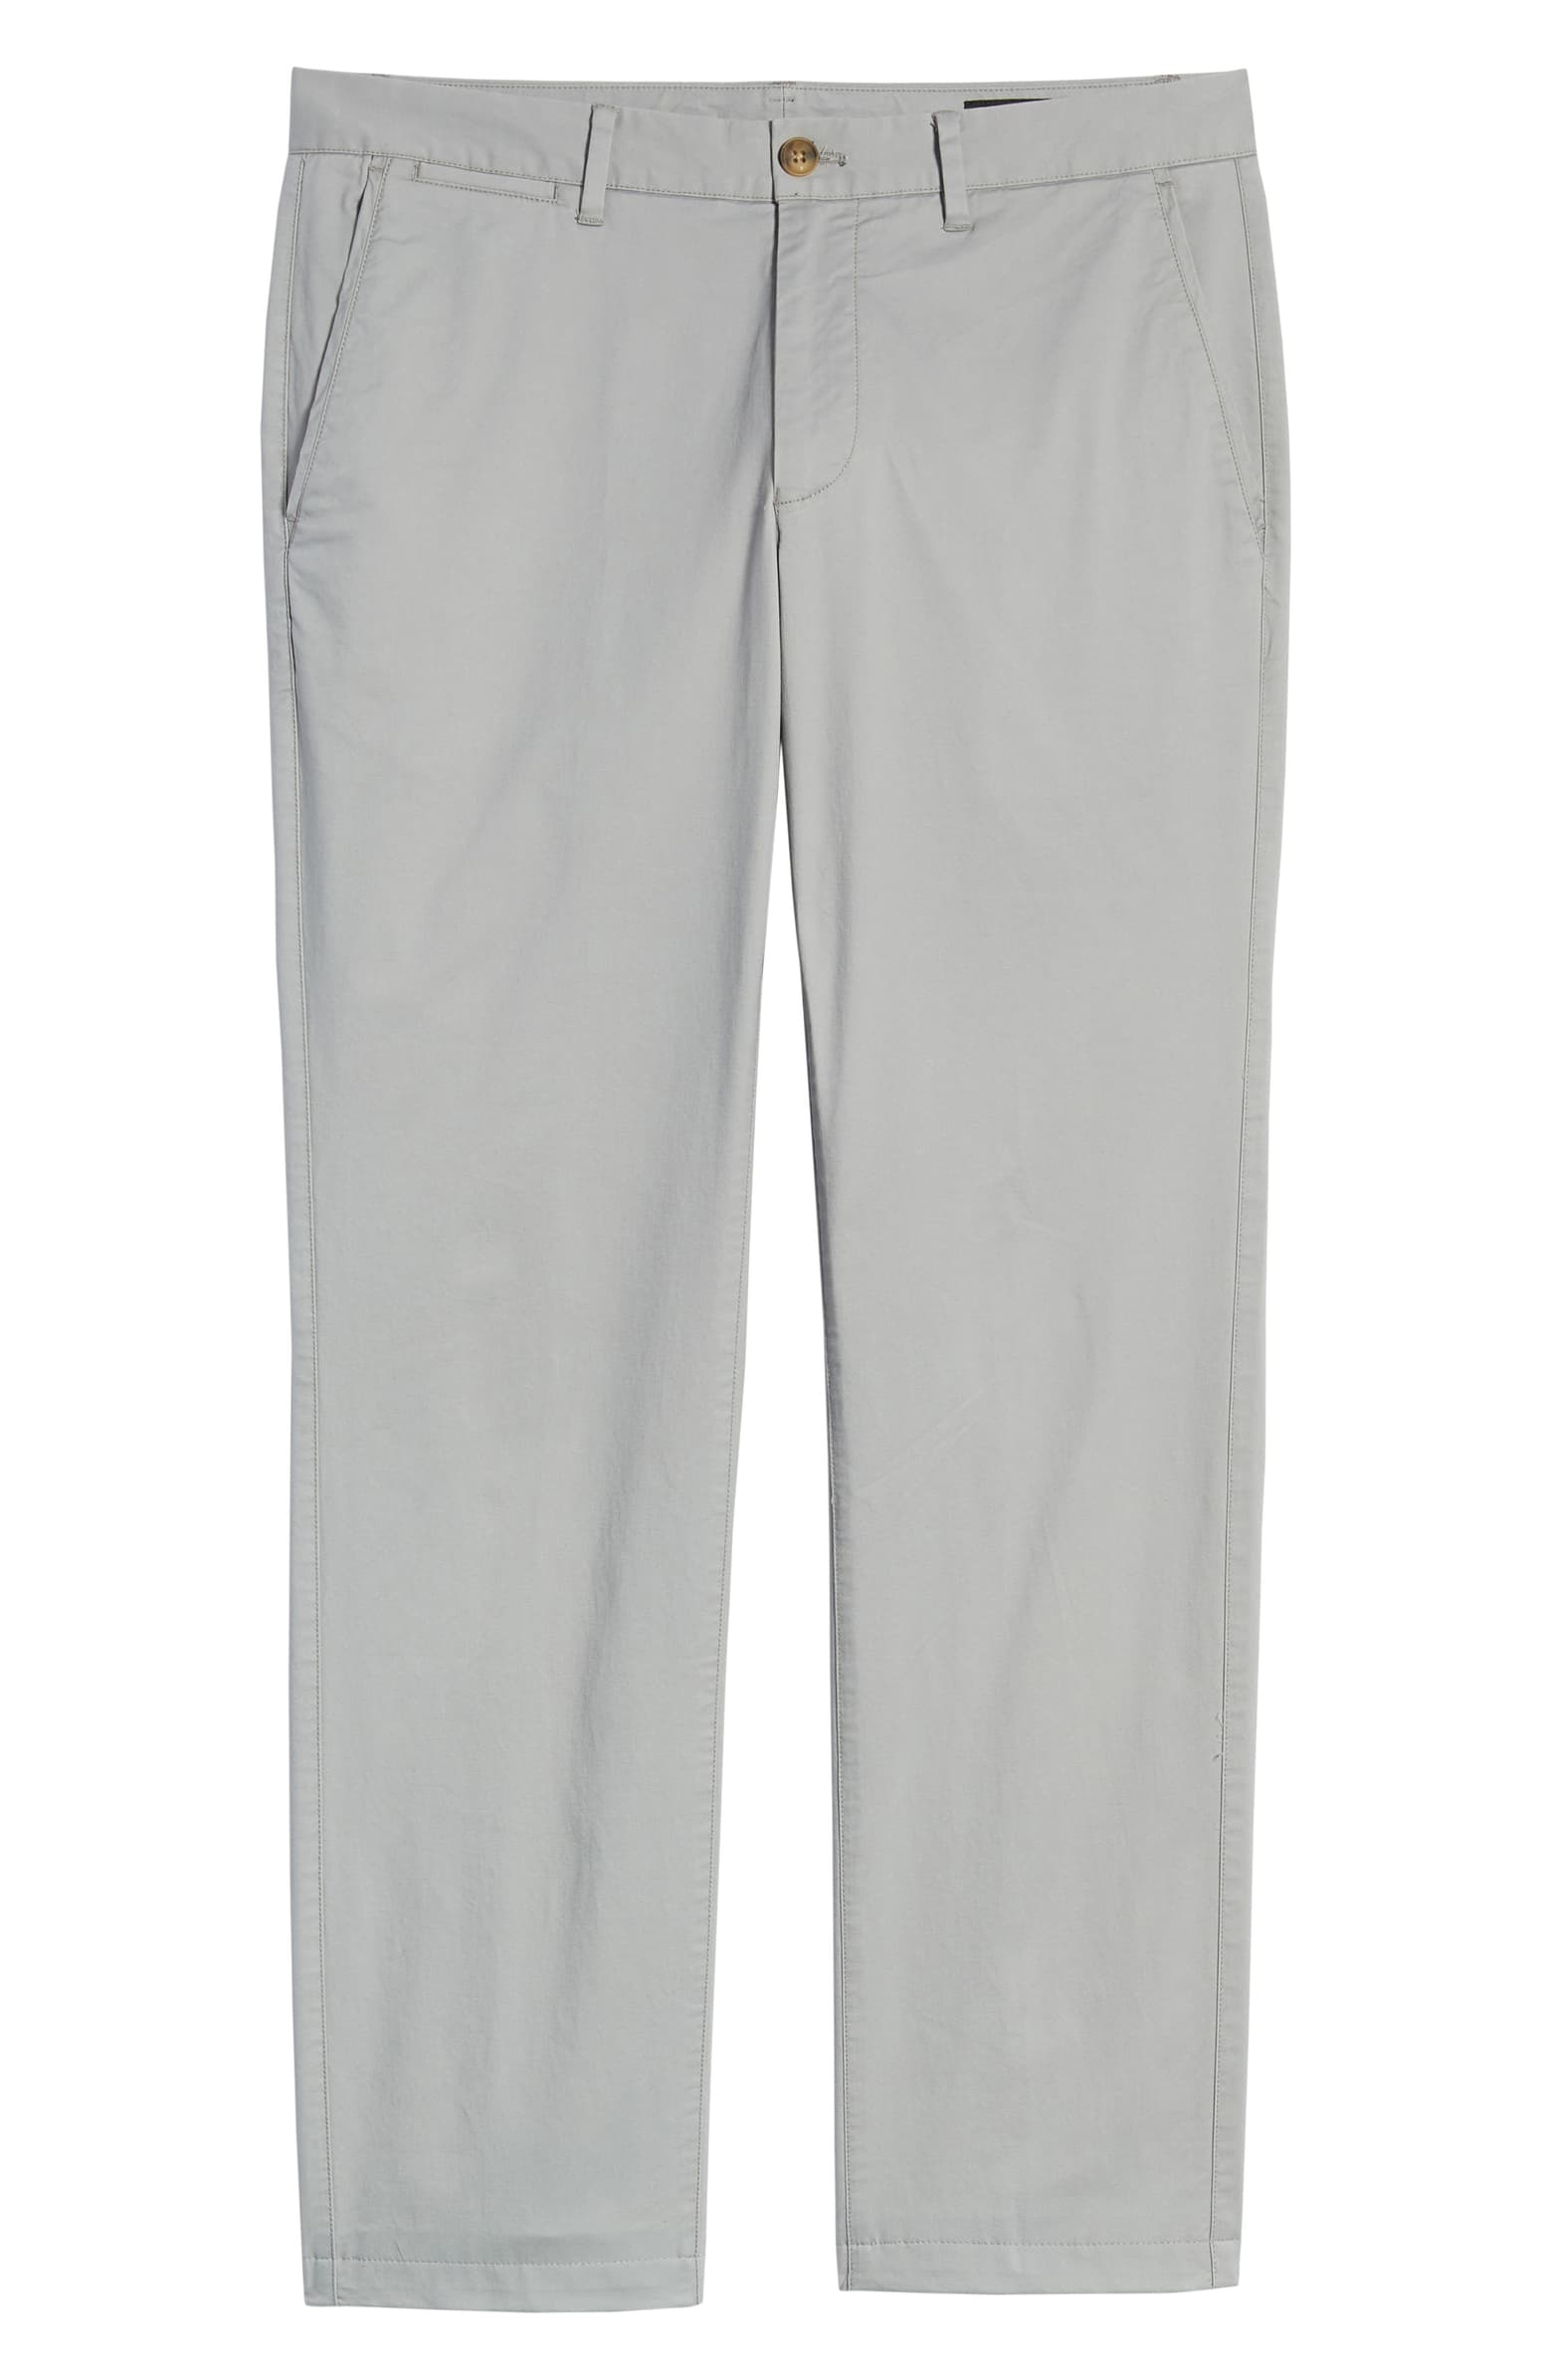 bonobos summer weight slim fit strech chinos in cityscape.jpeg